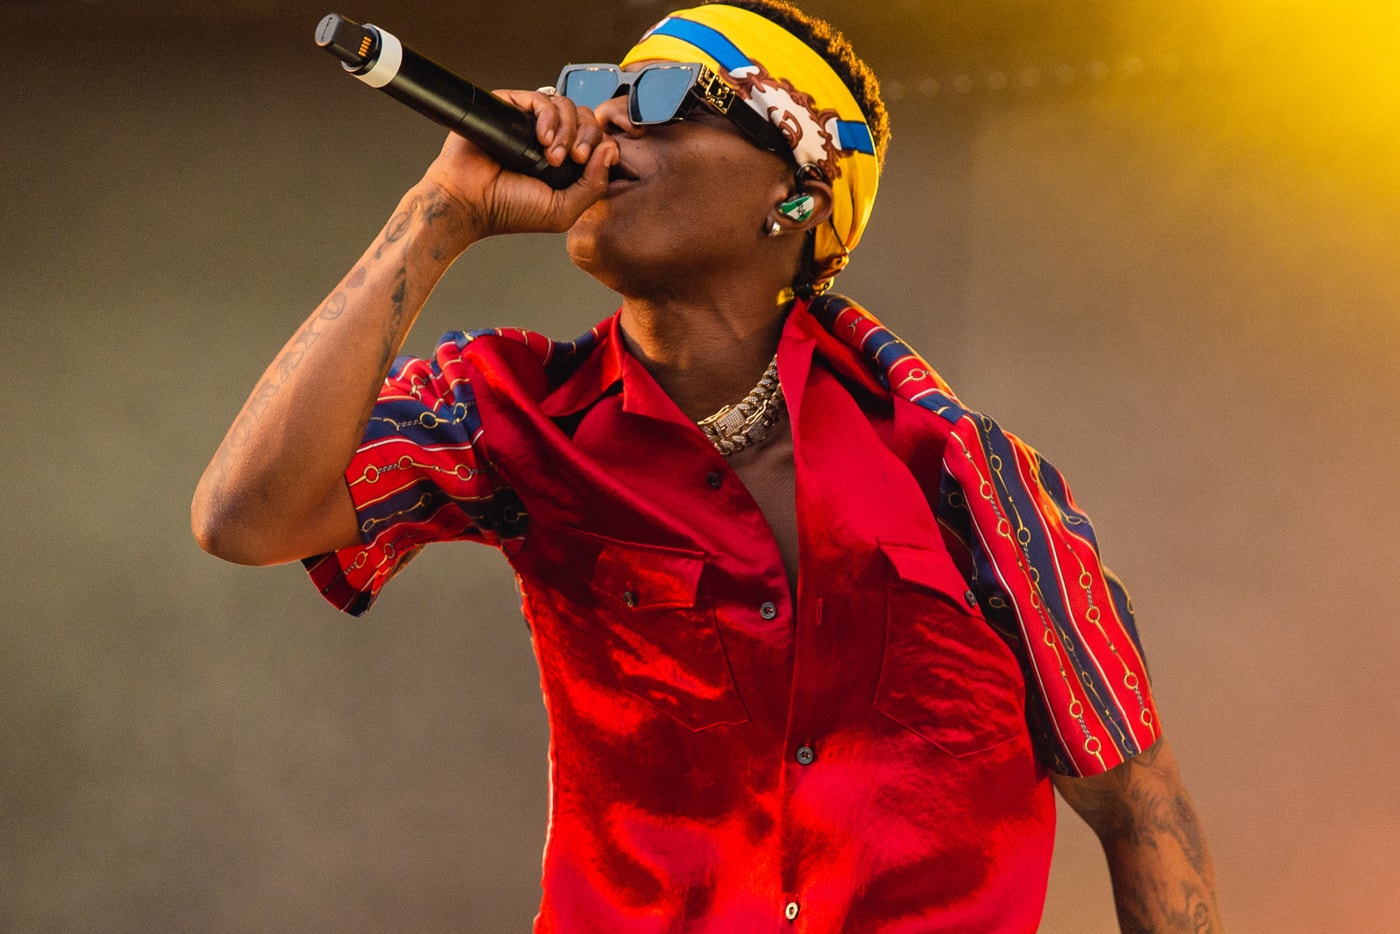 wizkid-chris-brown-section-boyz-mike-will-made-it-shabba